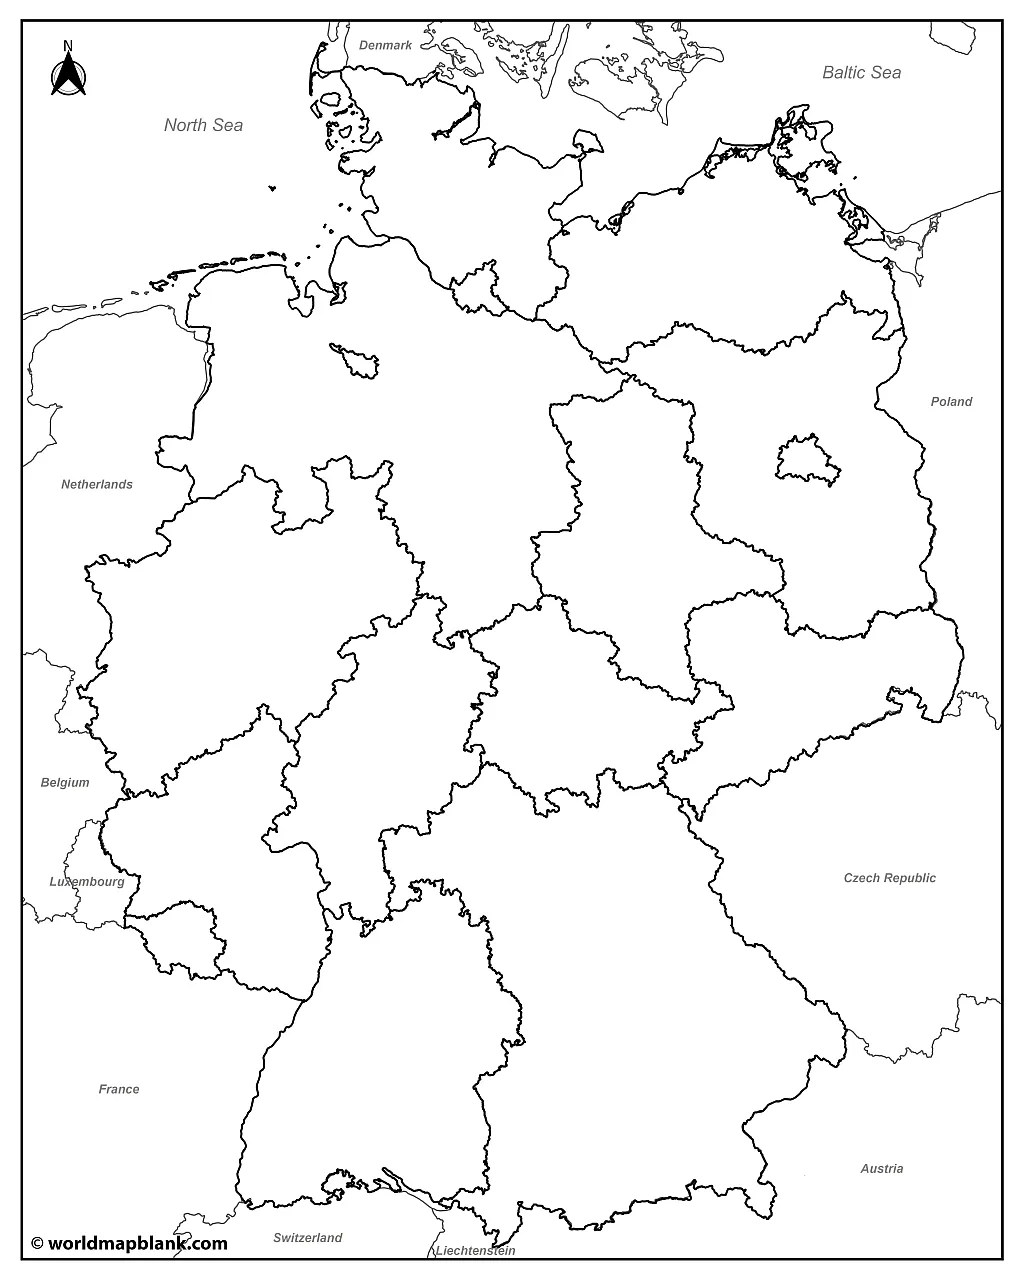 Outline of Germany